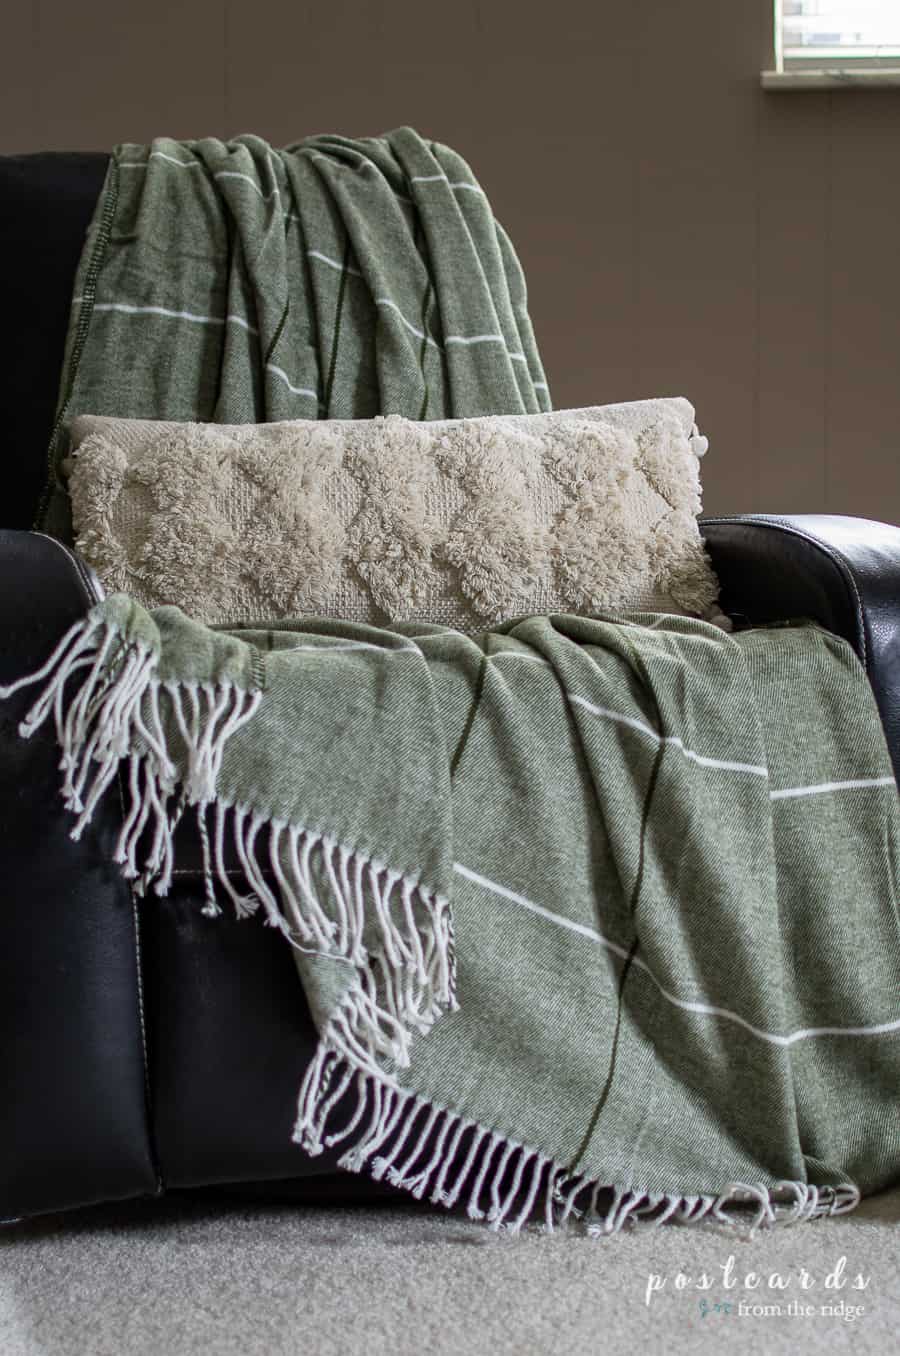 soft textured pillow and cozy throw blanket